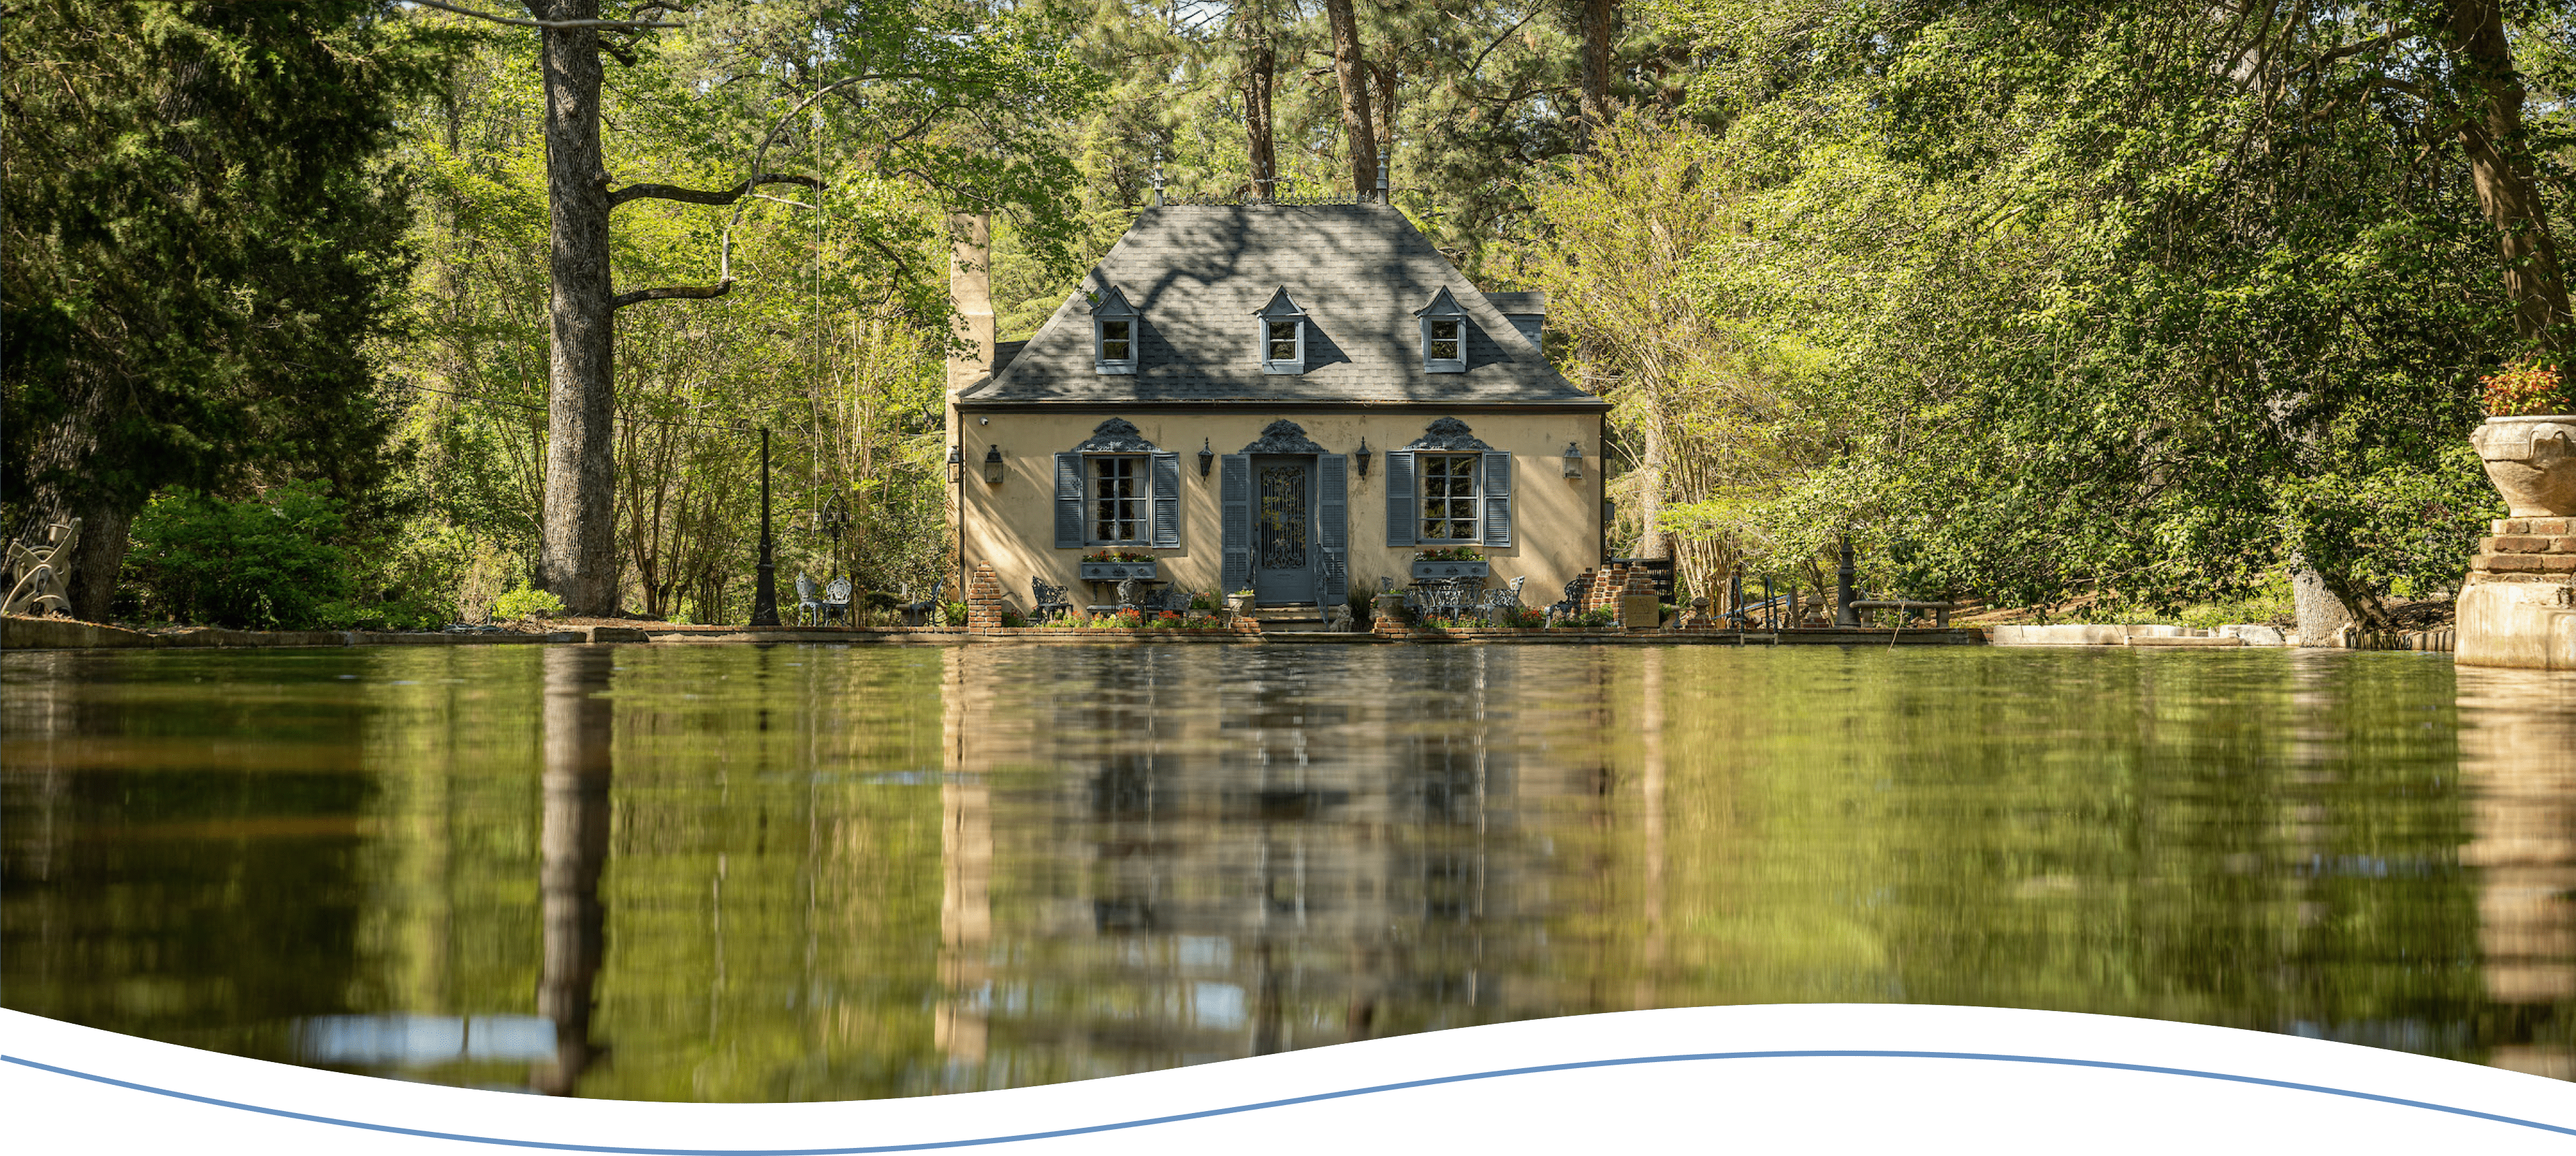 An old mansion by a lake